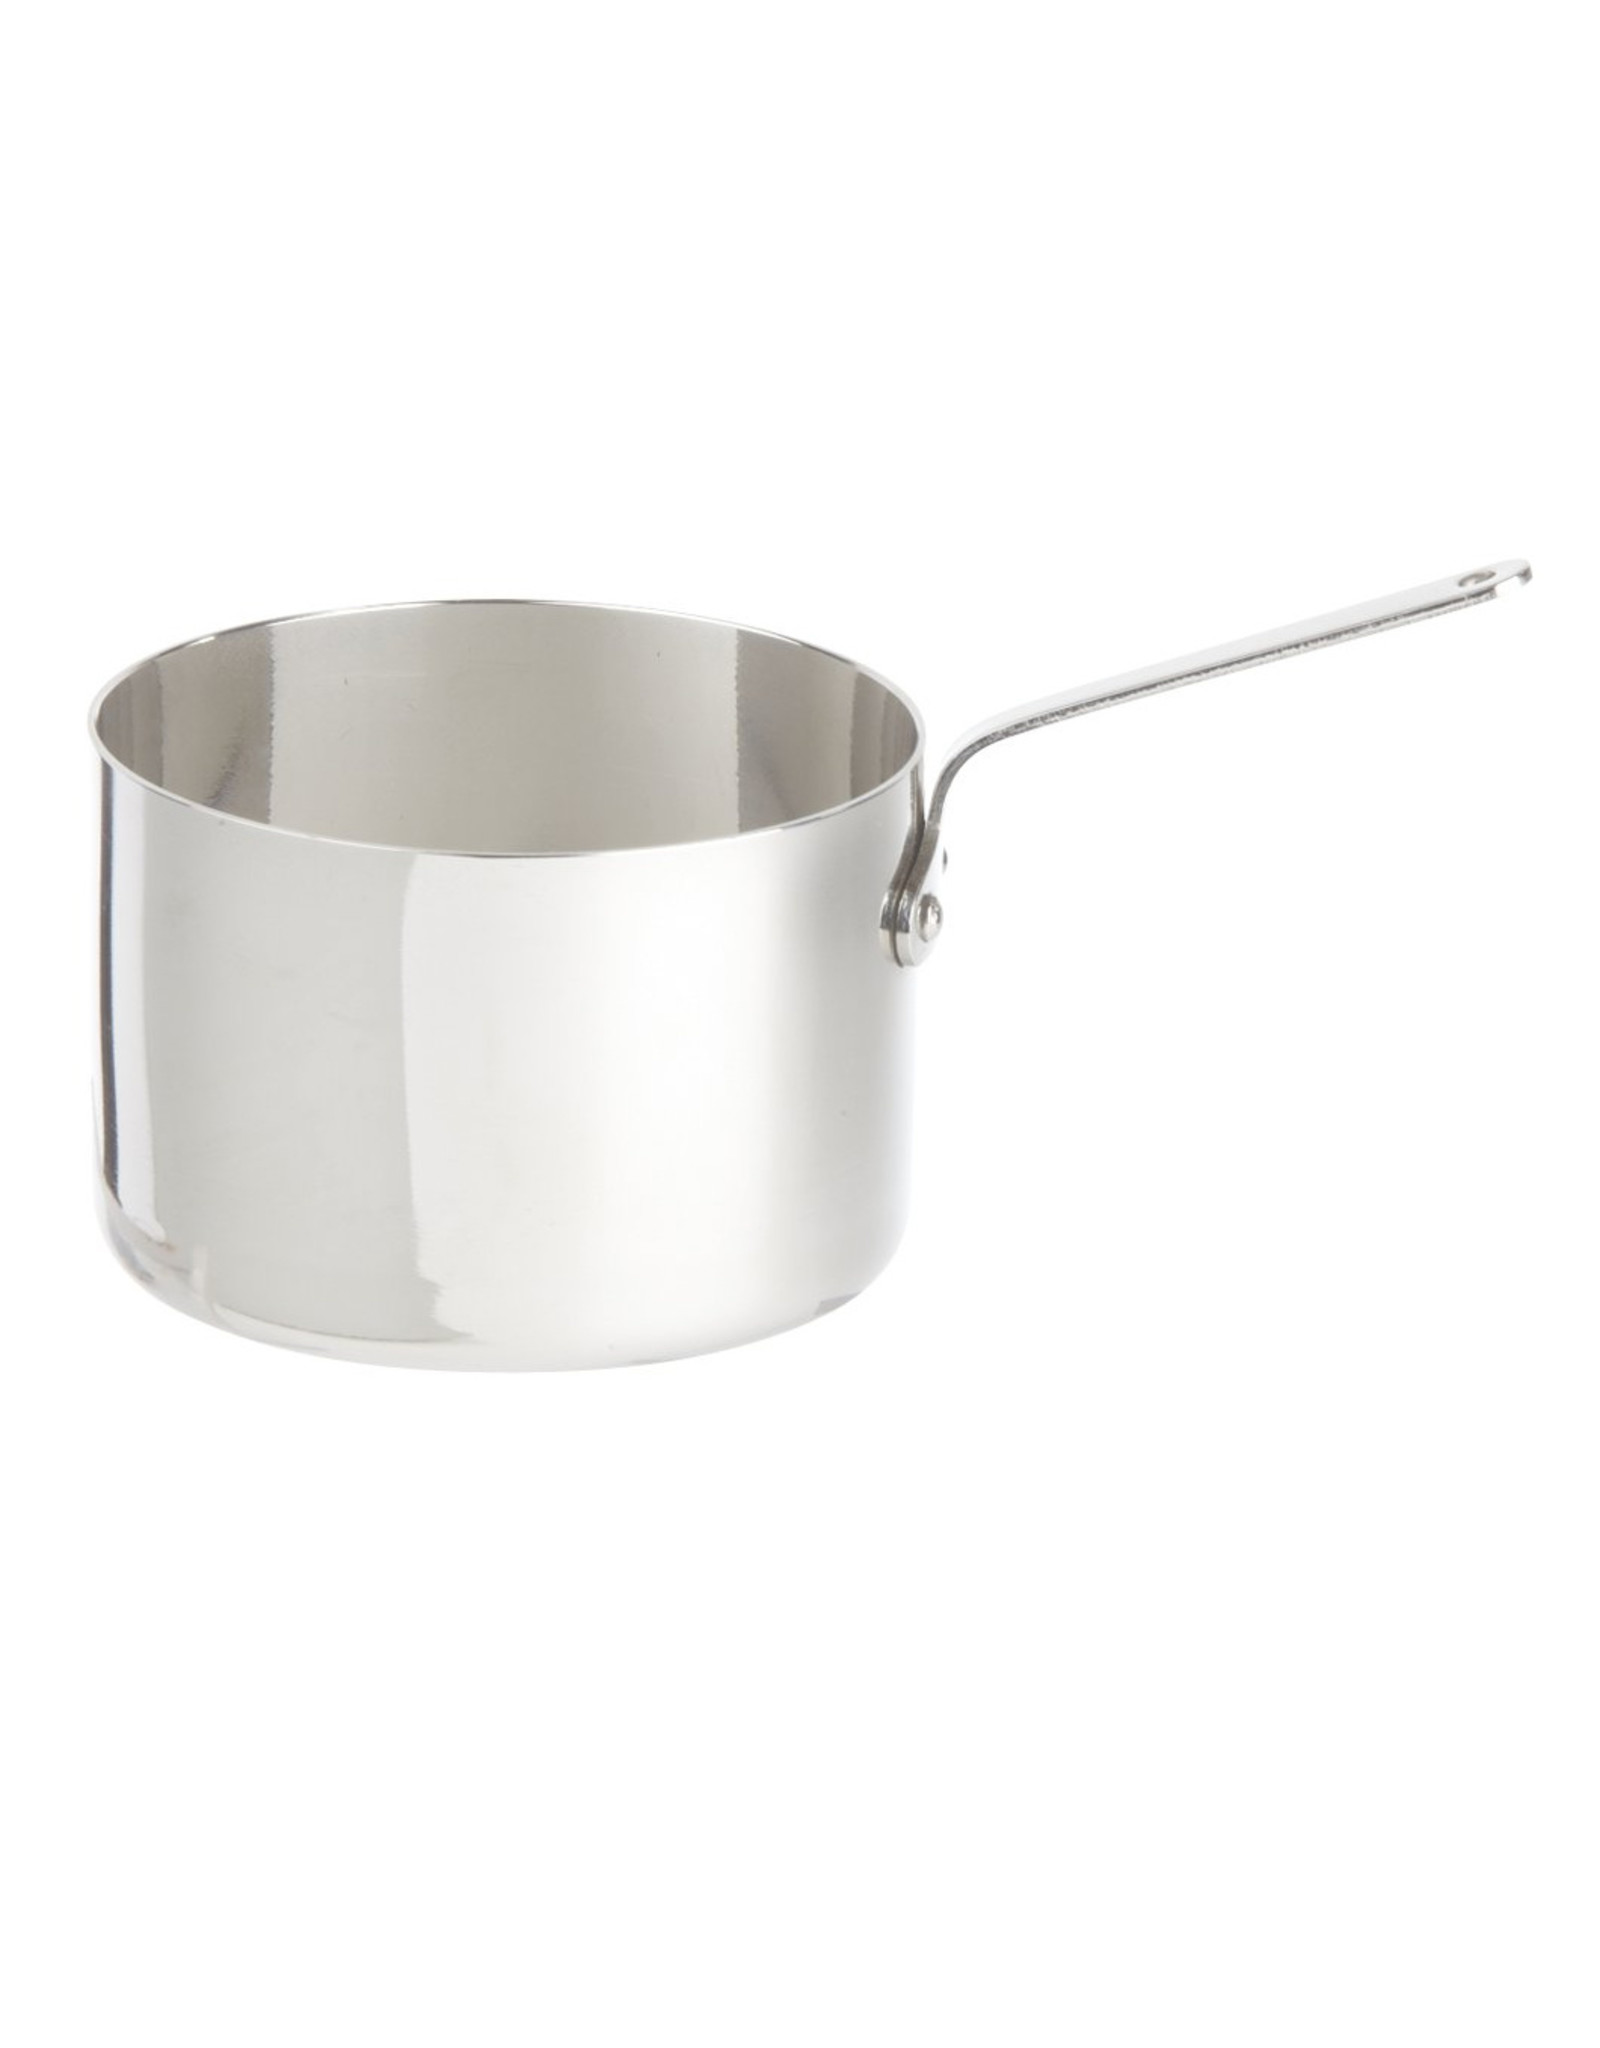 Stylepoint Stainless steel pan high mini 7 x 4,5 cm